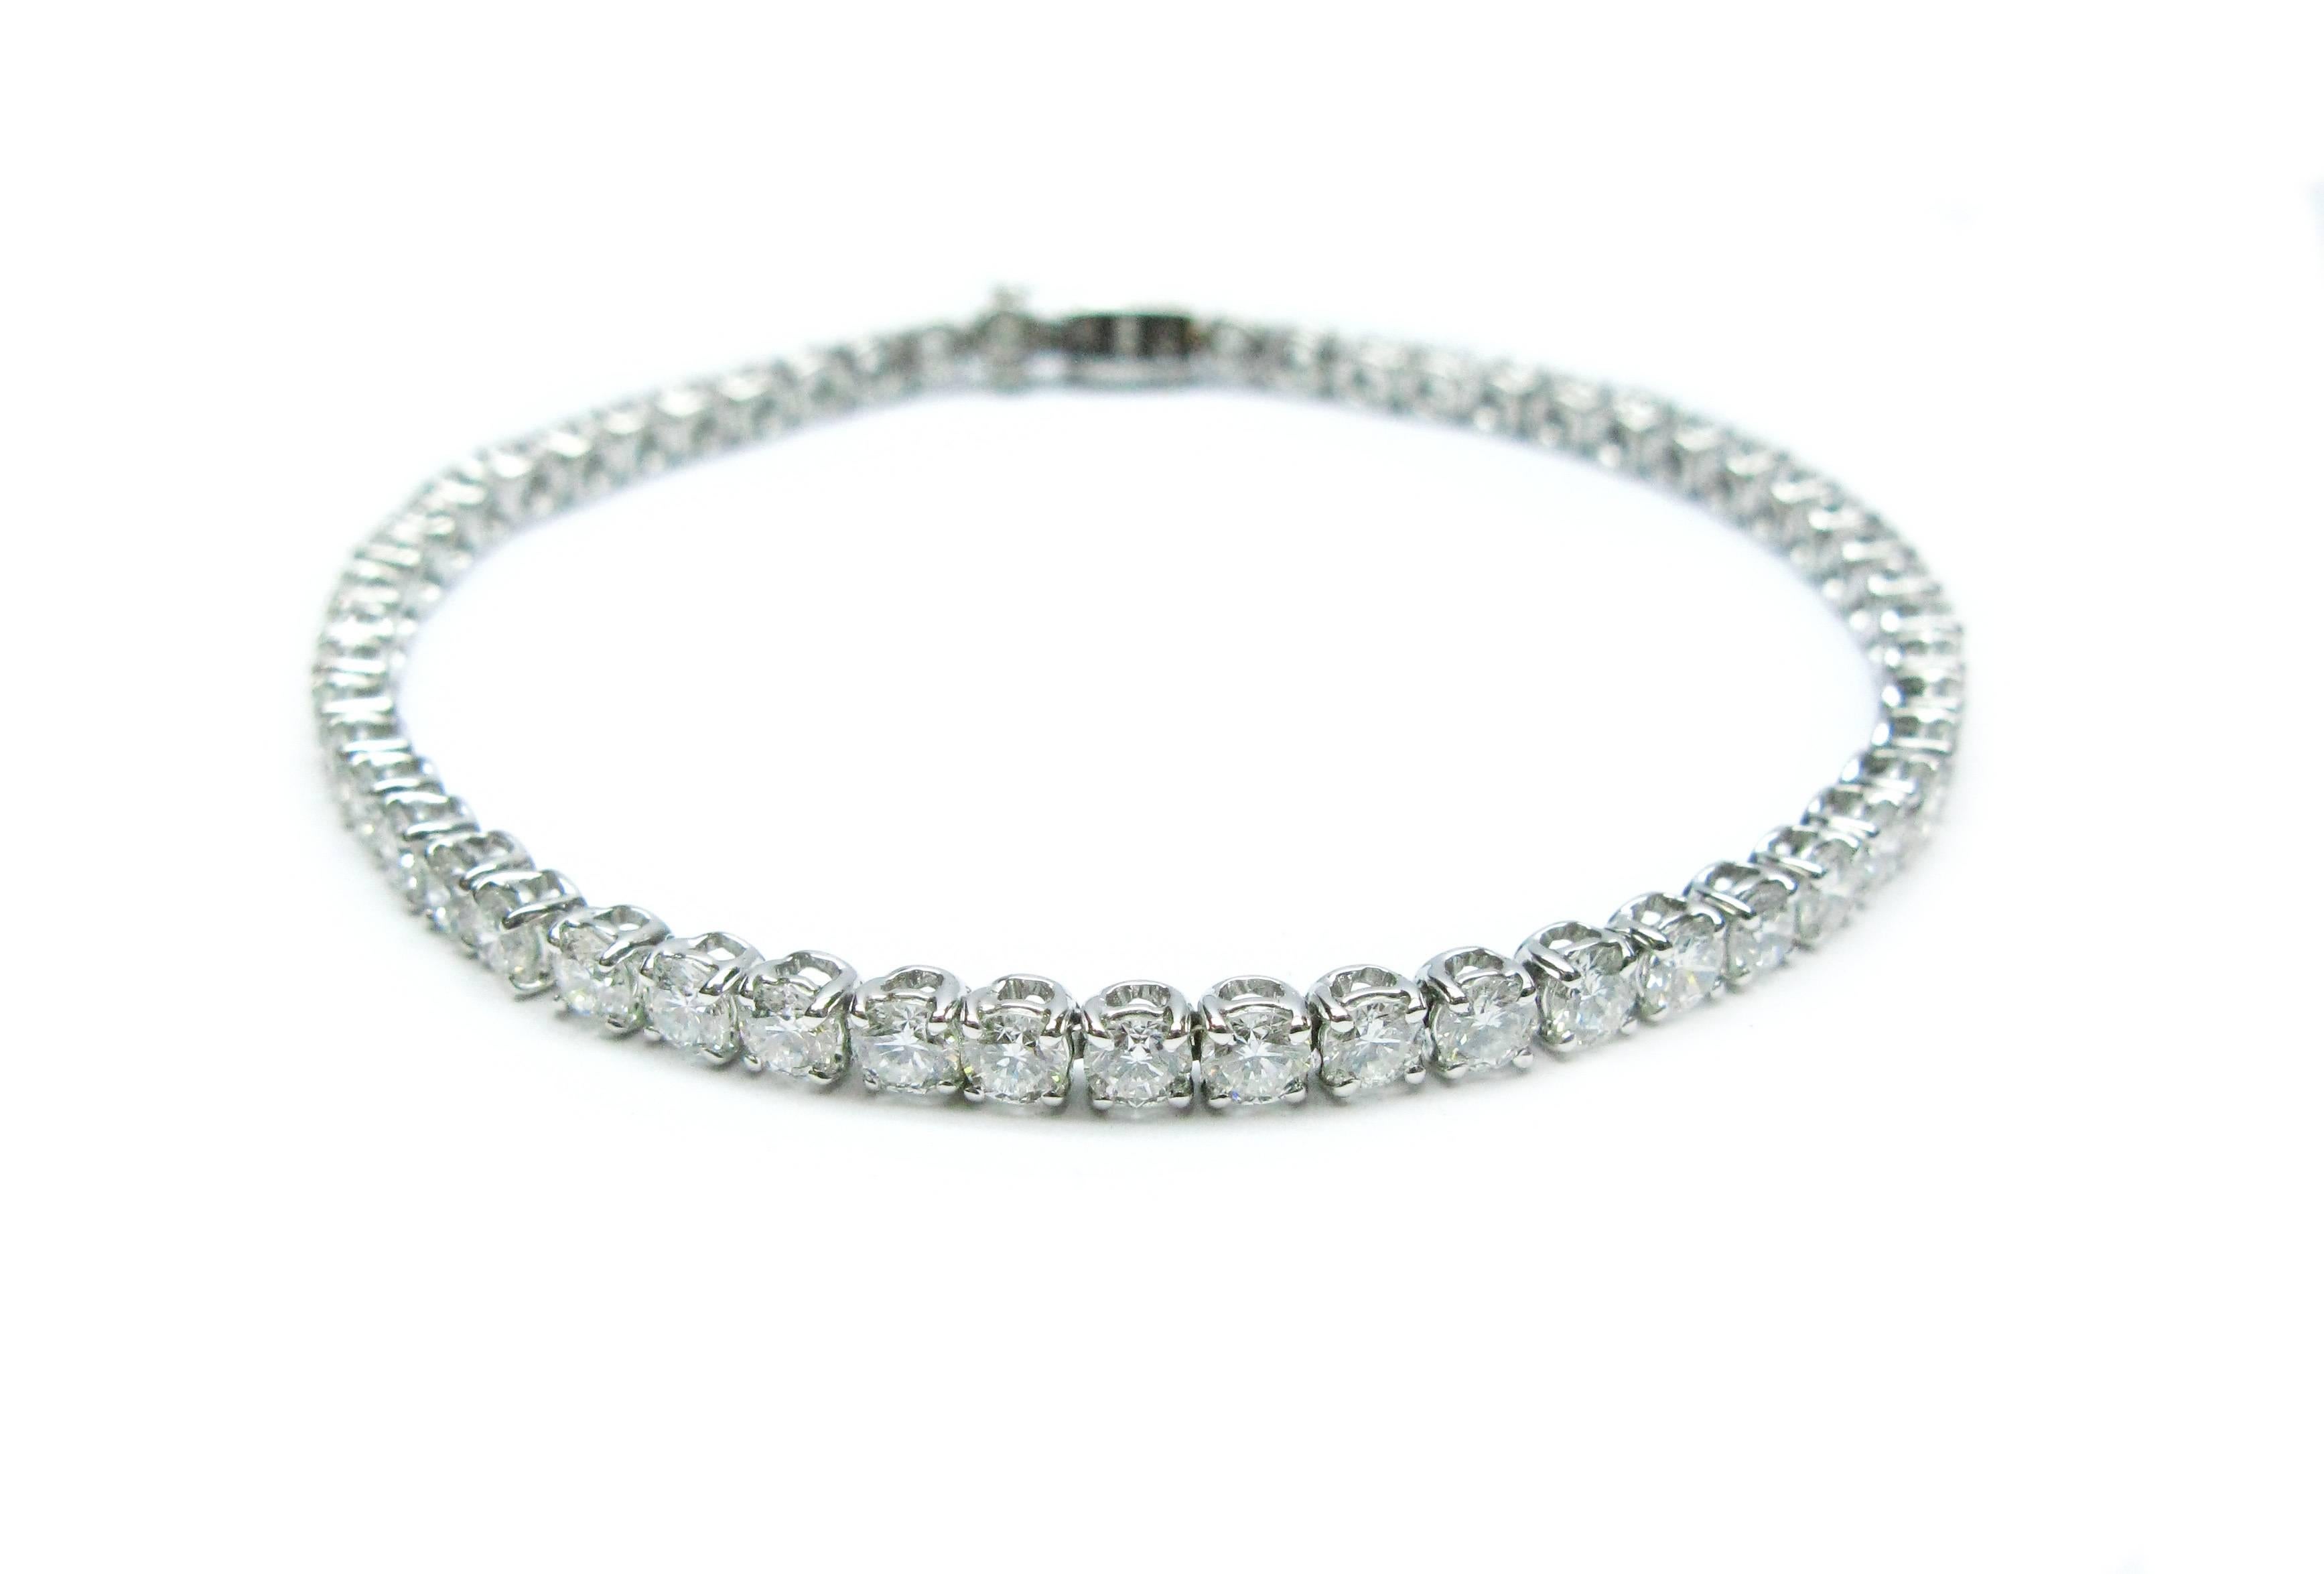 This beautiful Bulgari tennis bracelet is part of the Griffe collection. It features 55 sparkling F/G color, VS clarity, Round Brilliant cut diamonds set into 18kt white gold 4-prong baskets. The combined weight of these gemstones is 6.12cts. This